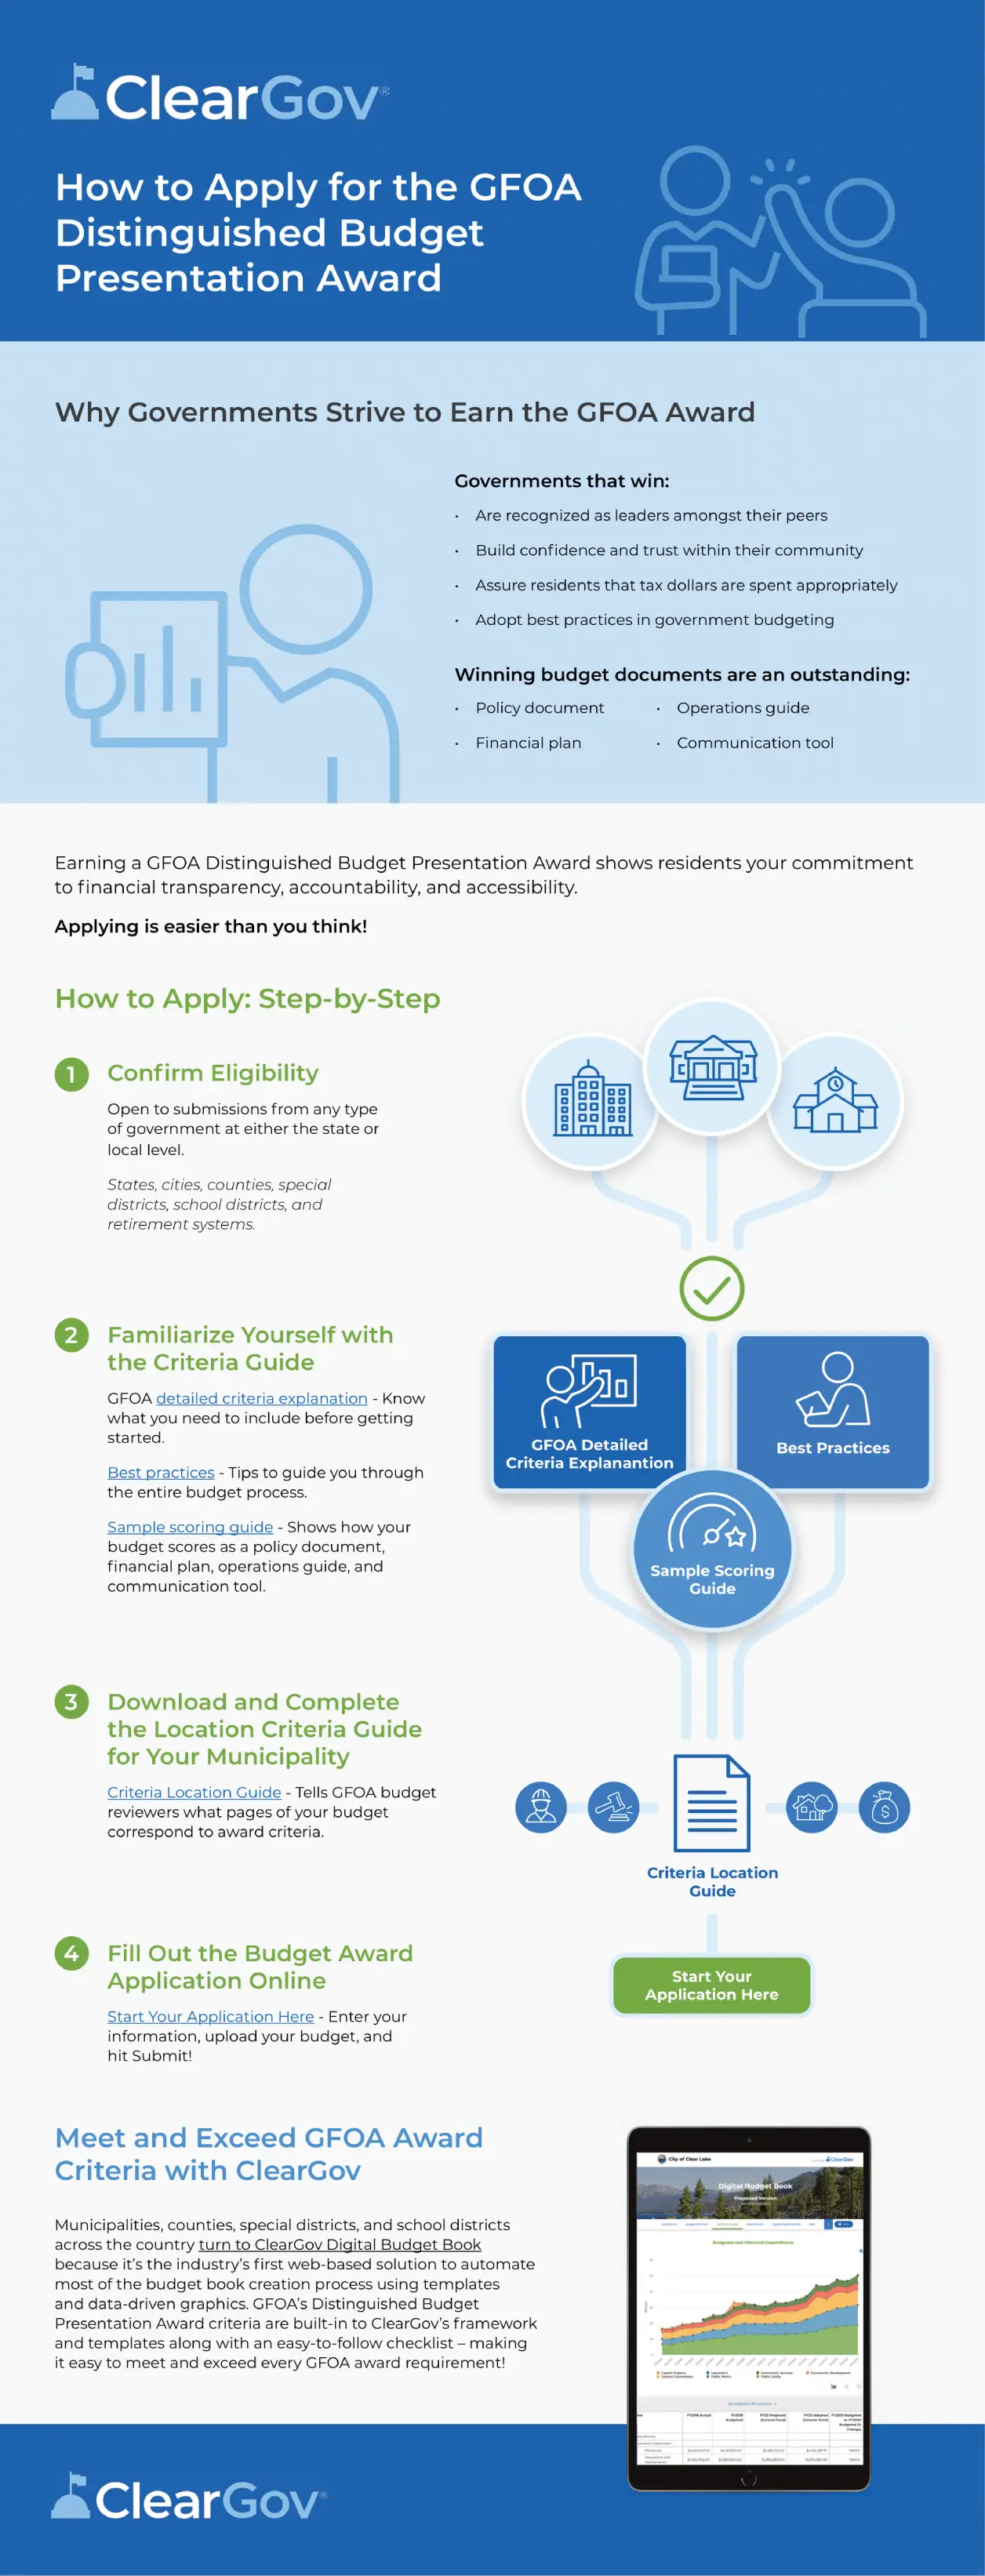 ClearGov Infographic: How To Apply for the GFOA Distinguished Budget Presentation Award. Why Governments Strive to Earn the GFOA Award. Governments that win: are recognized as leaders amongst their peers, build confidence and trust within their community, assure residents that tax dollars are spent appropriately, and adopt best practices in govenment budgeting. Winning budget documents are an outstanding: policy document, operations guide, financial plan, and communication tool. Earning a GFOA Distinguished Budget Presentation Award shows residents your commitment to financial transparency, accountability, and accessibility. Applying is easier than you think! How to Apply: Step-by-Step. First, Confirm Eligibility. Open to submissions from any type of govenment at either the state or local level. States, cities, counties, special districts, school districts, and retirement systems. Second, Familiarize Yourself with the Criteria Guide. GFOA detailed criteria explanation - Know what you need to include before getting started. Best practices - Tips to guide you through the entire budget process. Sample scoring guide - Shows how your budget scores as a policy document, financial plan, operations guide, and communication tool. Third, Download and Complete the Location Criteria Guide for Your Municipality. Criteria Location Guide - Tells GFOA budget reviewers what pages of your budget correspond to award criteria. Fourth, Fill Out the Budget Award Application Online. Start Your Application Here - Enter your information, upload your budget, and hut Submit! Meet and Exceed GFOA Award Criteria with ClearGov. Municipalities, counties, special districts, and school districts across the country turn to ClearGov Digital Budget Book because it's the industry's first web-based solution to automate most of the budget book creation process using templates and data-driven graphics. GFOA's Distinguished Budget Presentation Award criteria are built-in to ClearGov's framework and templates along with an easy-to-follow checklist - making it easy to meet and exceed every GFOA award requirement!